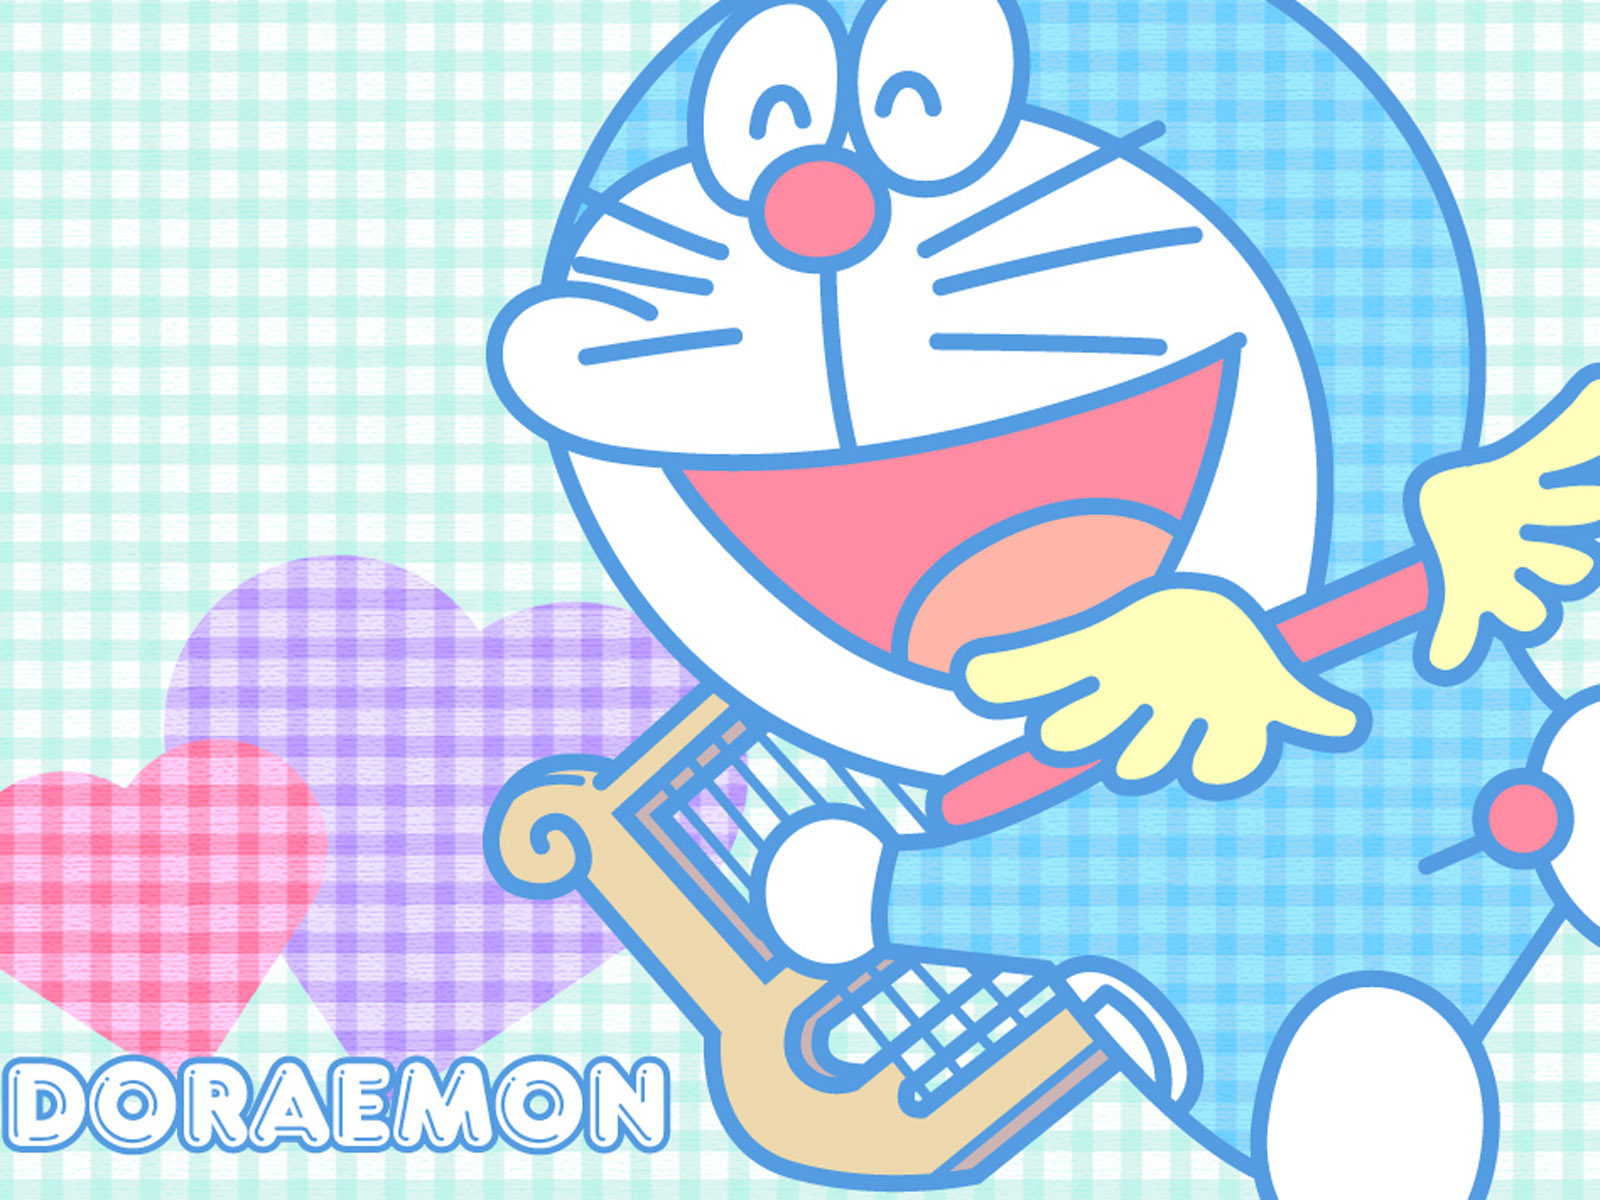 Doraemon Wallpaper For Mobile Iphone Android For Free Download HDjpg